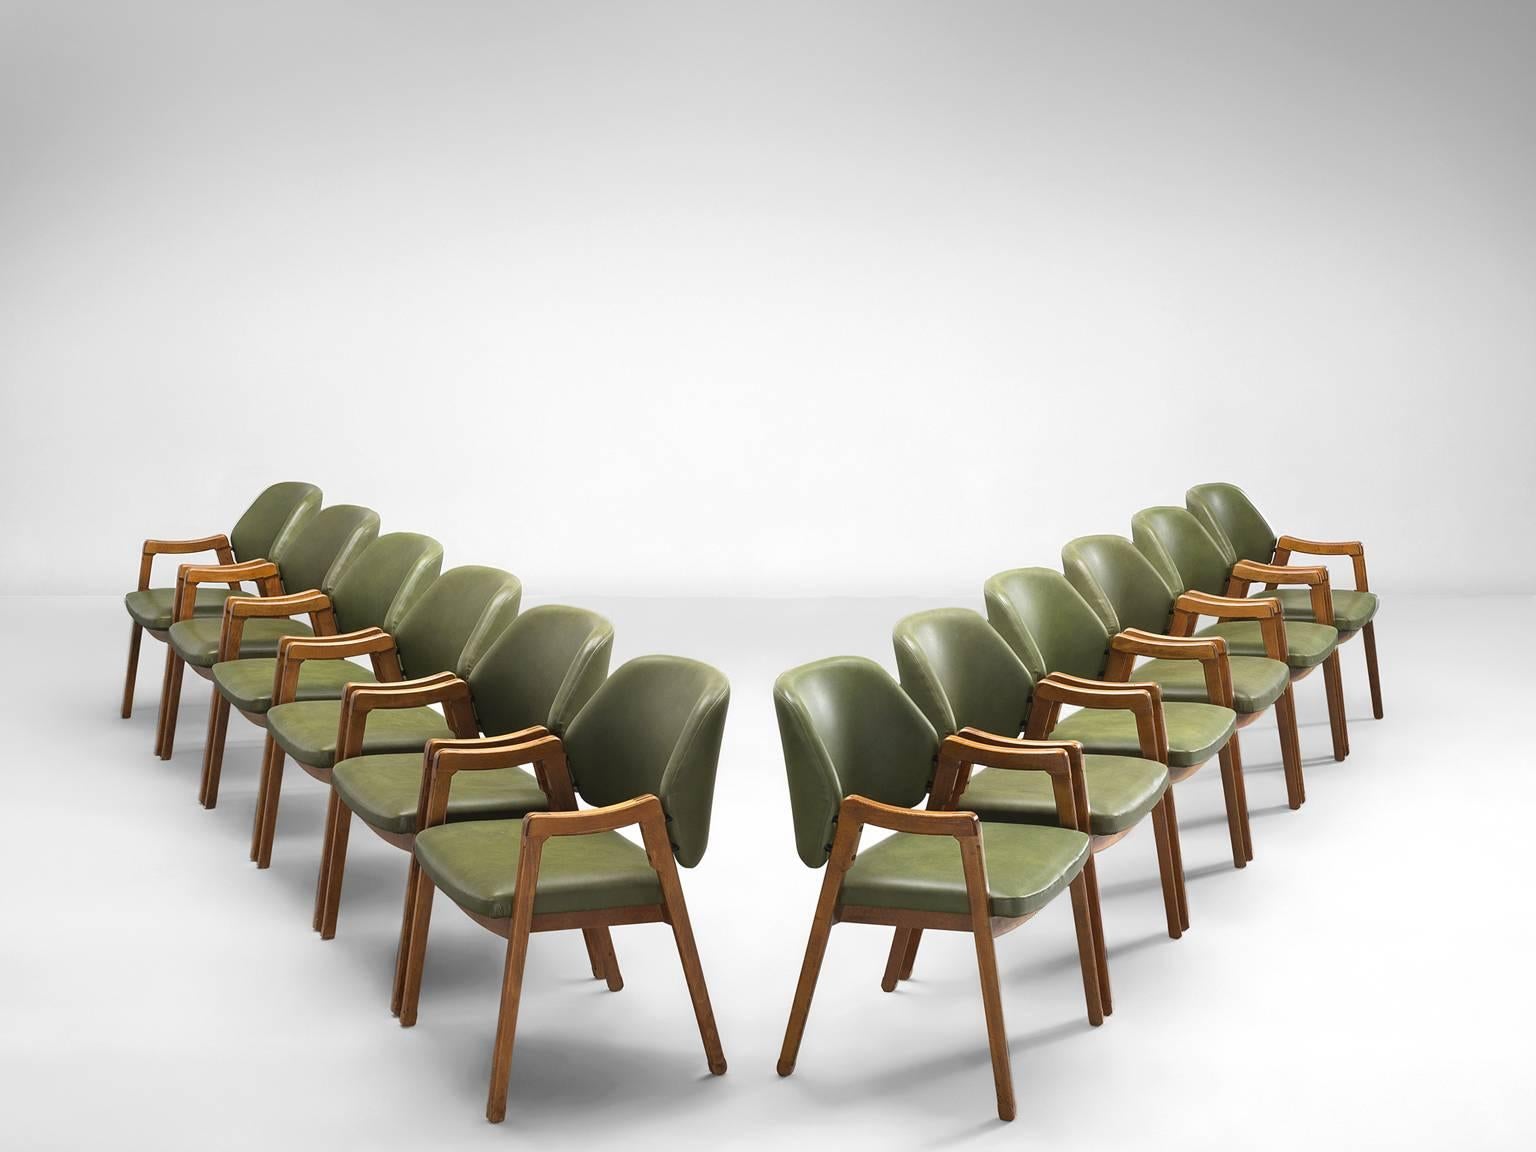 Six armchairs by Ico Parisi for Cassina, beech and leatherette, Italy, 1963.

This large set of green conference chairs '814' were are executed to perfection and provide great comfort. These chairs look almost sculpted thanks to the exquisite